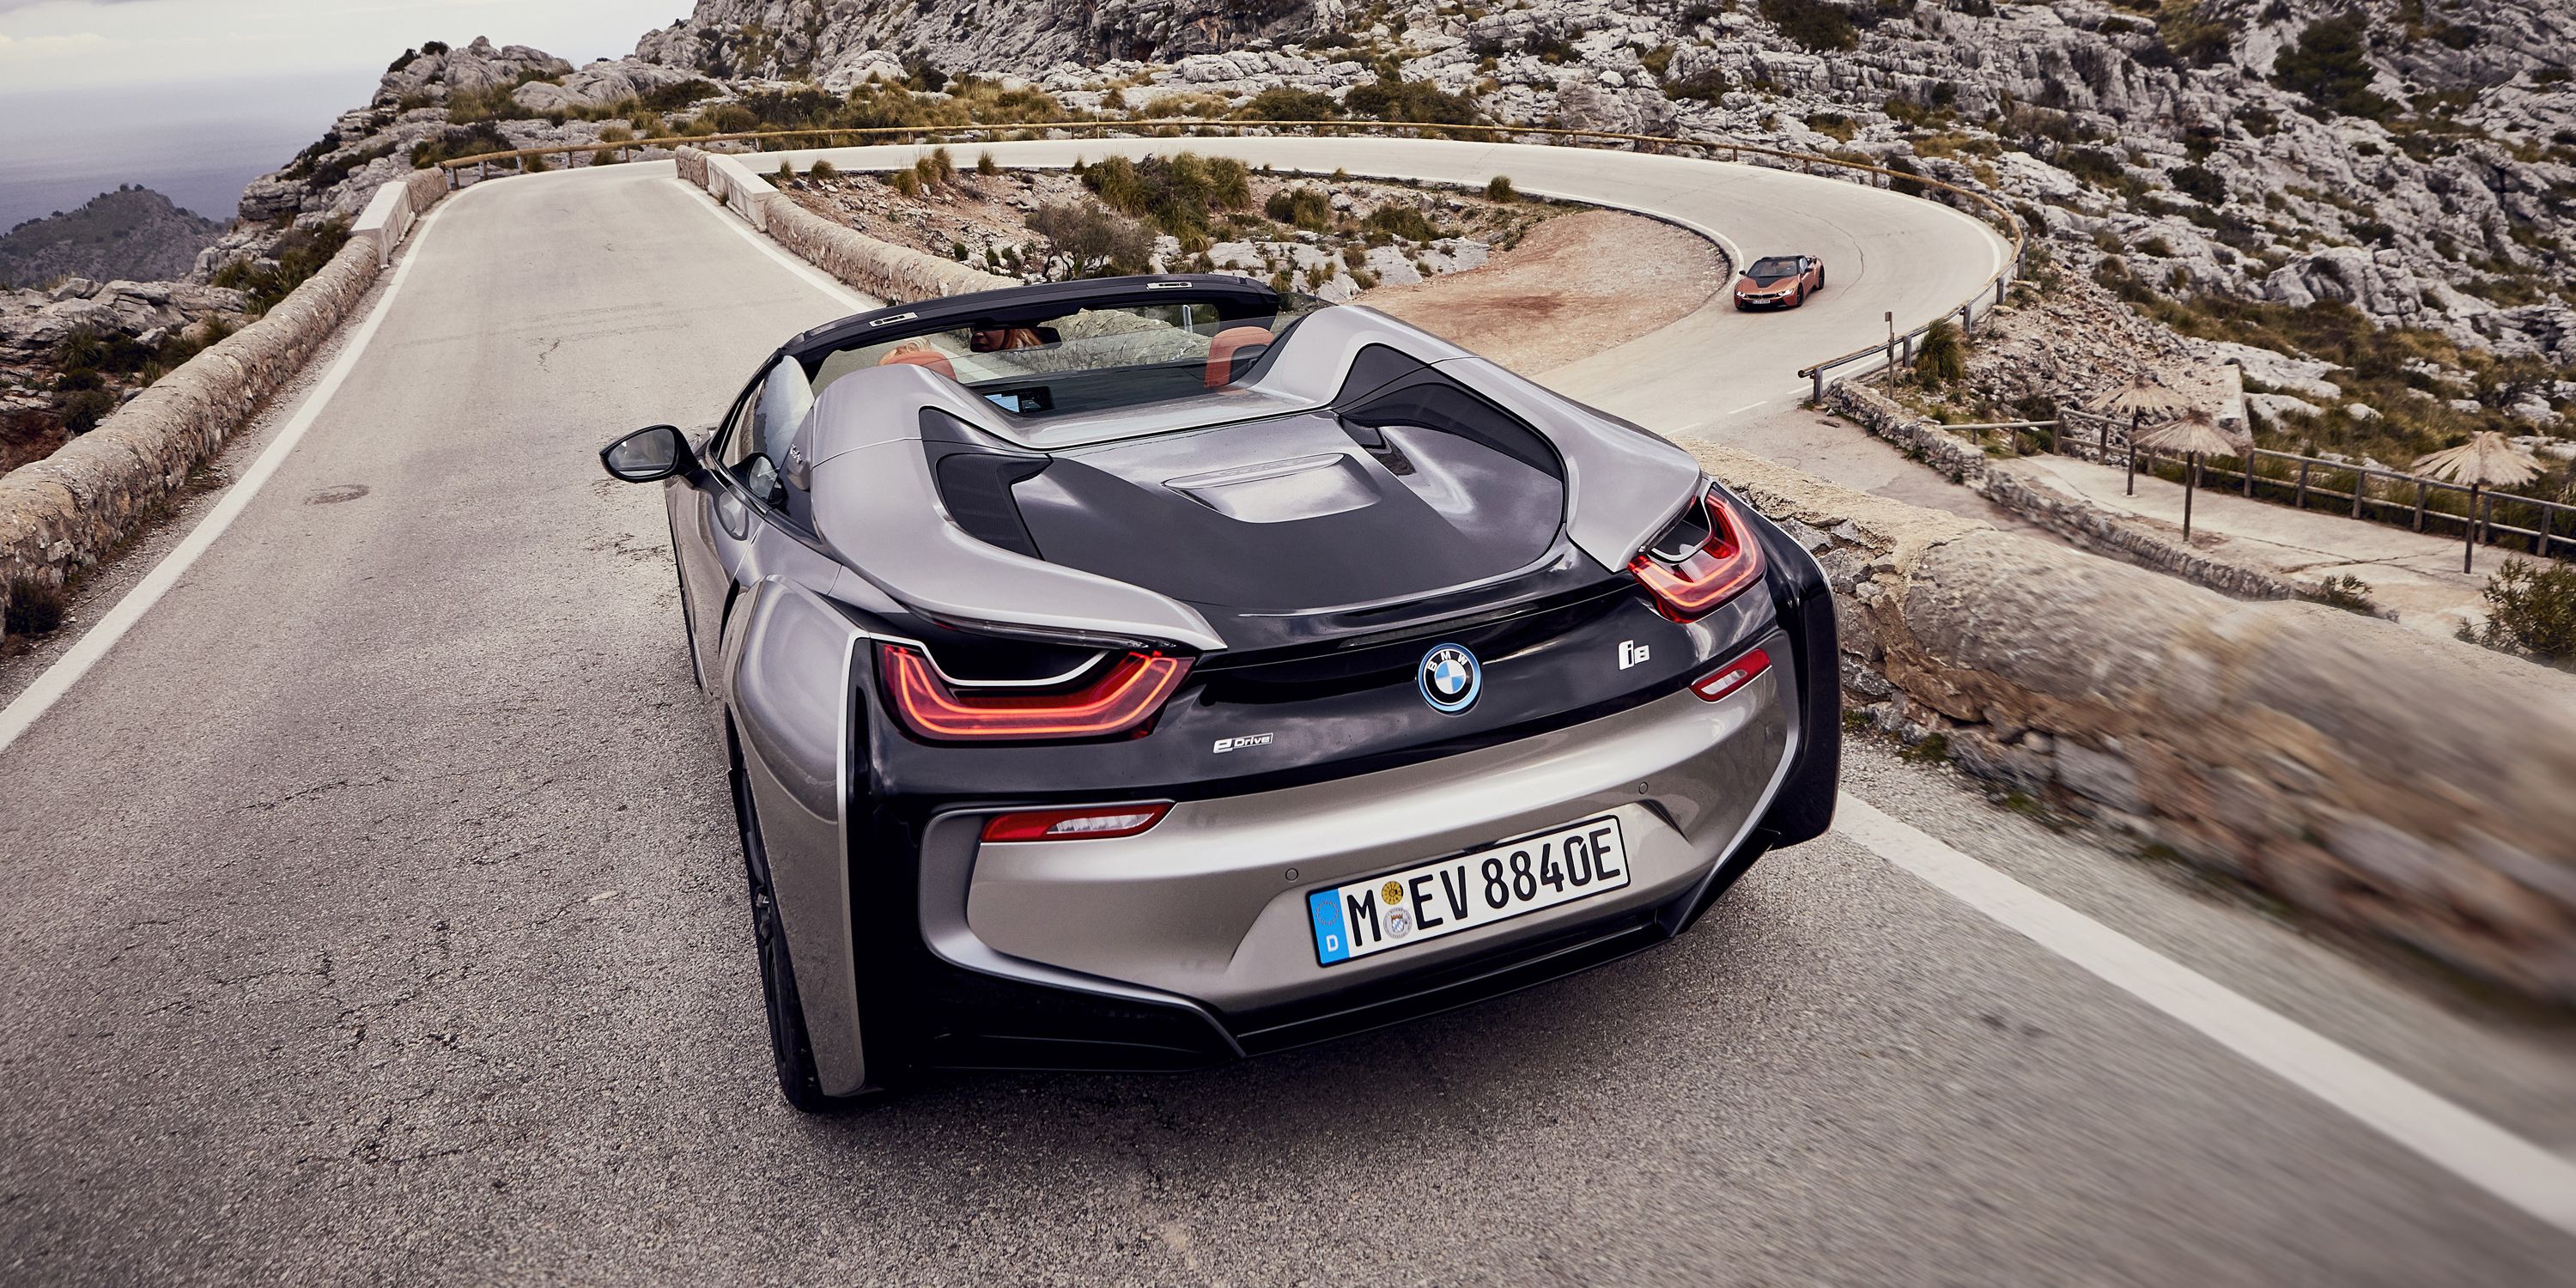 The Impressive Part of the BMW Roadster Is How Made